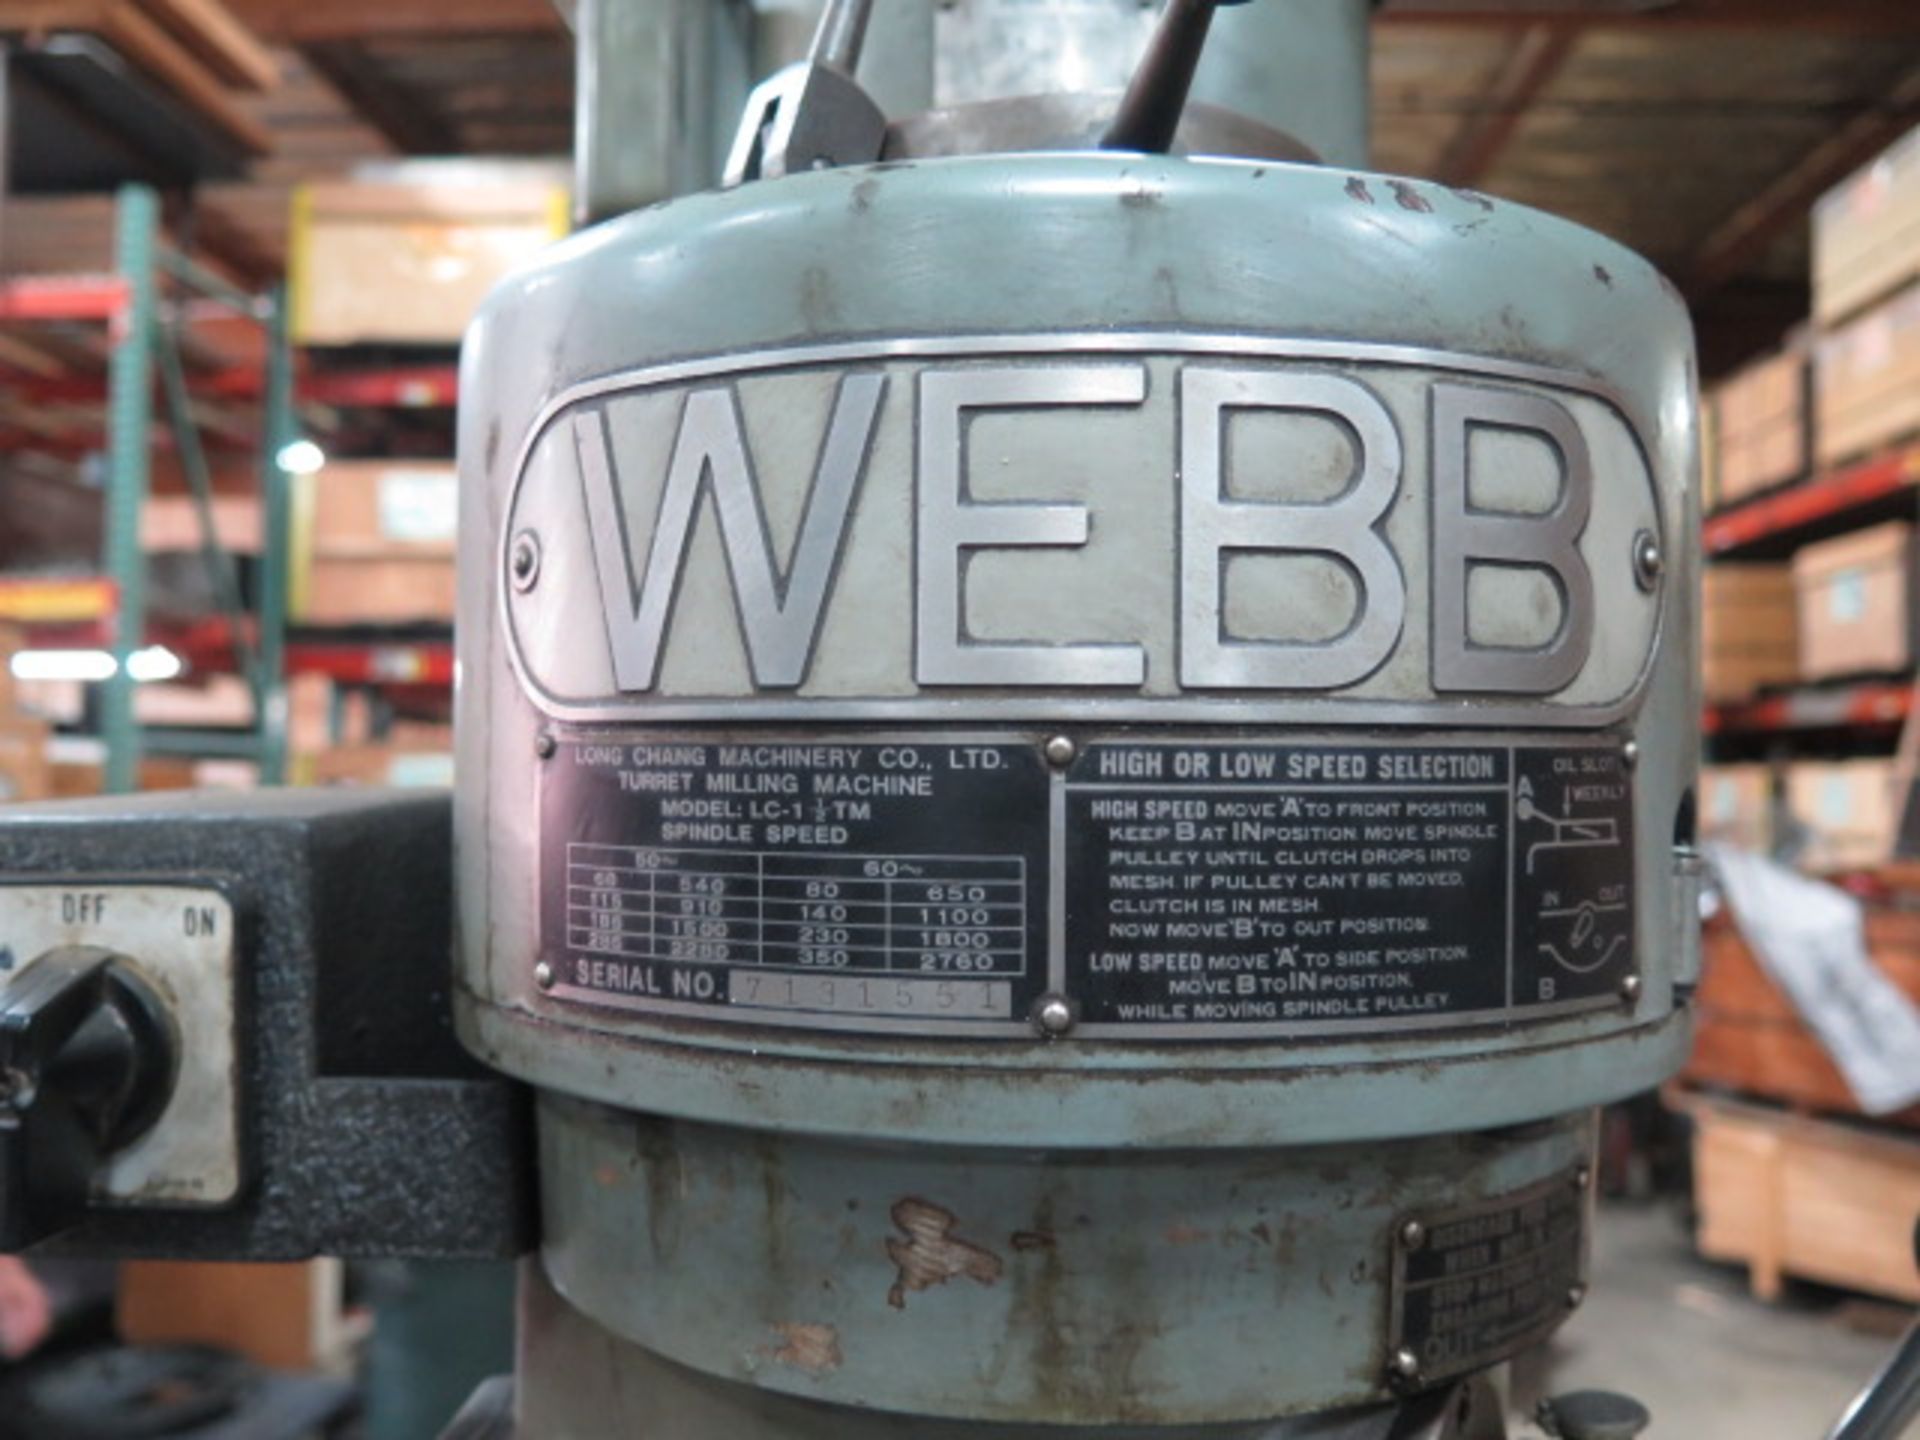 Webb Vertical Mill s/n 7131551 w/ 2Hp Motor, 80-2760 RPM, 9” x 47” Table (SOLD AS-IS - NO WARRANTY) - Image 7 of 7